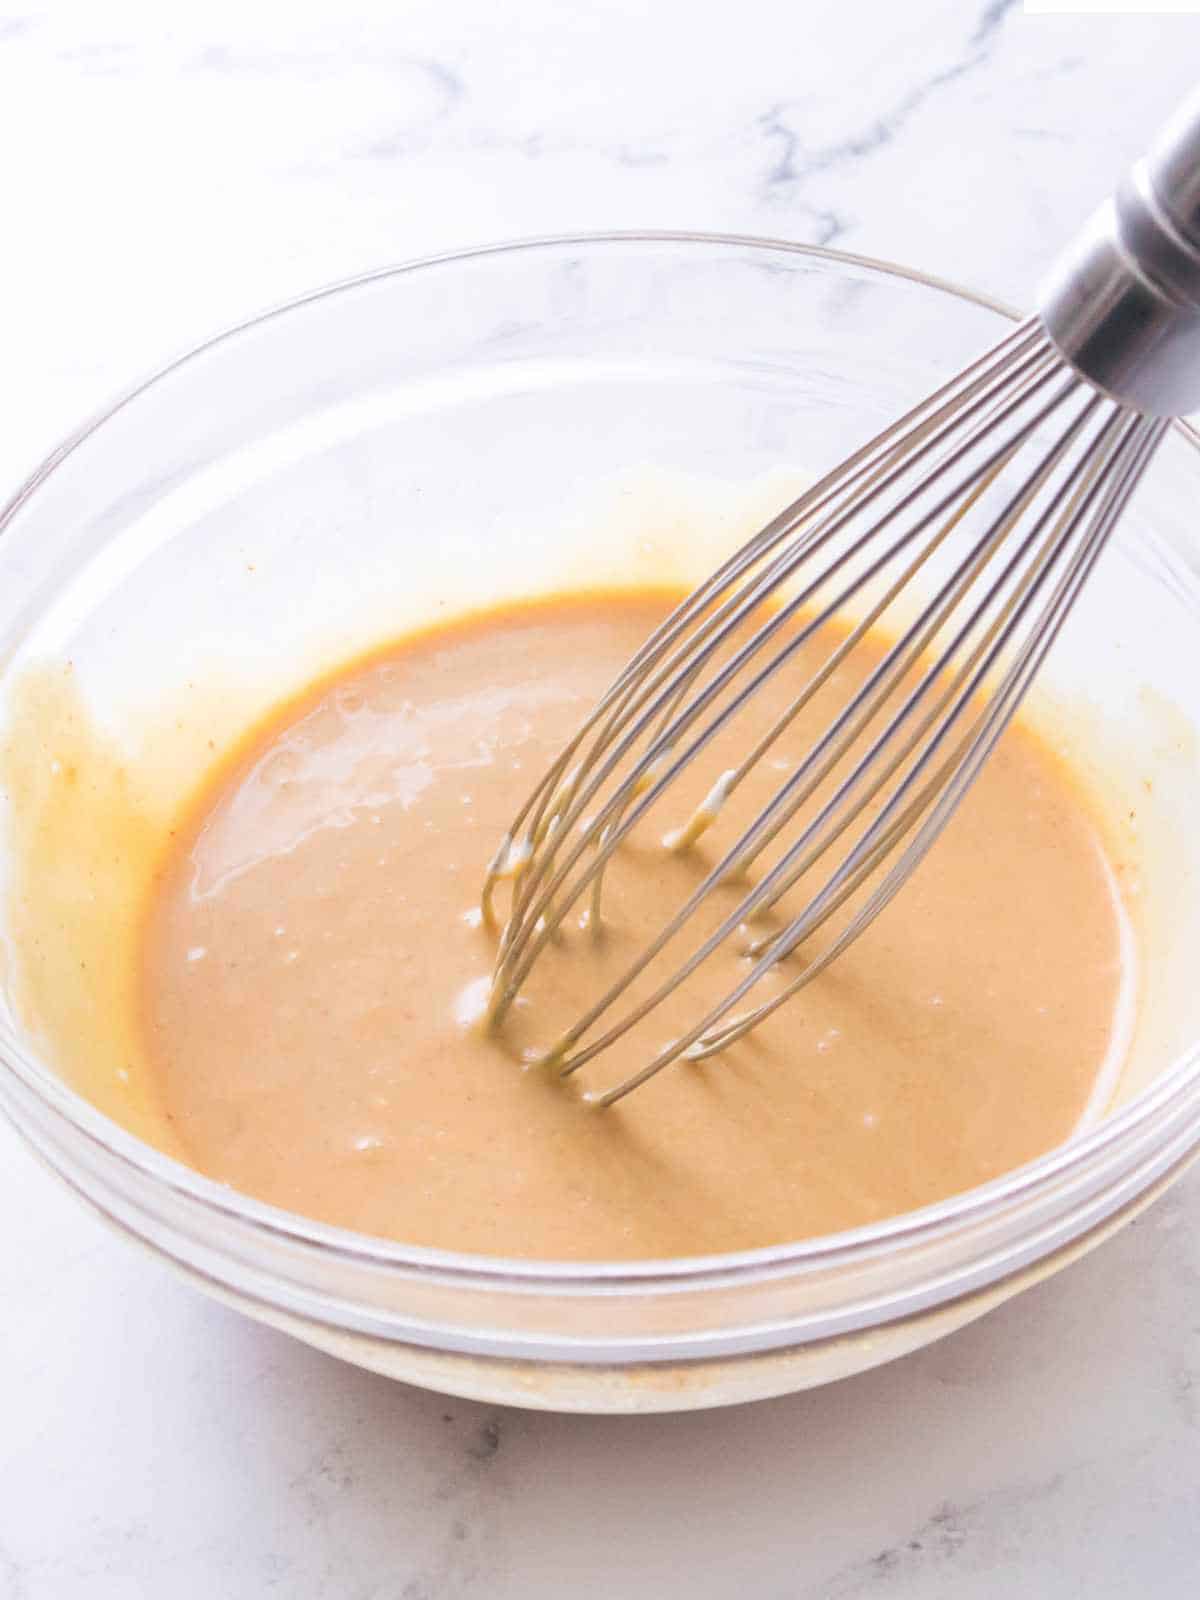 whisk in a bowl of blended sauce.